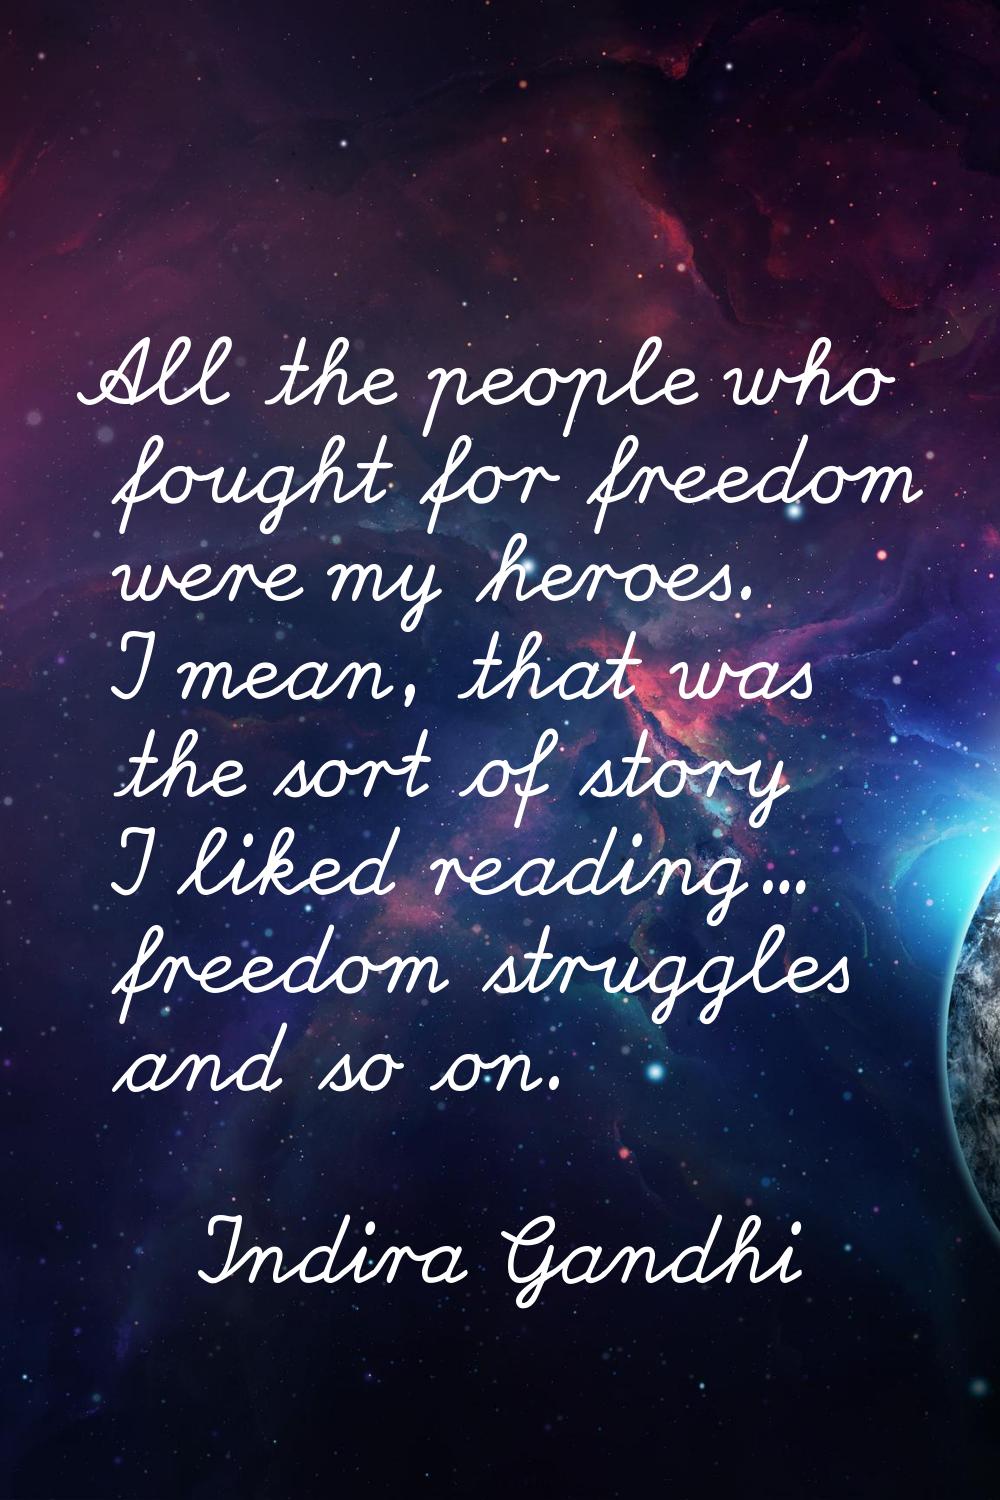 All the people who fought for freedom were my heroes. I mean, that was the sort of story I liked re